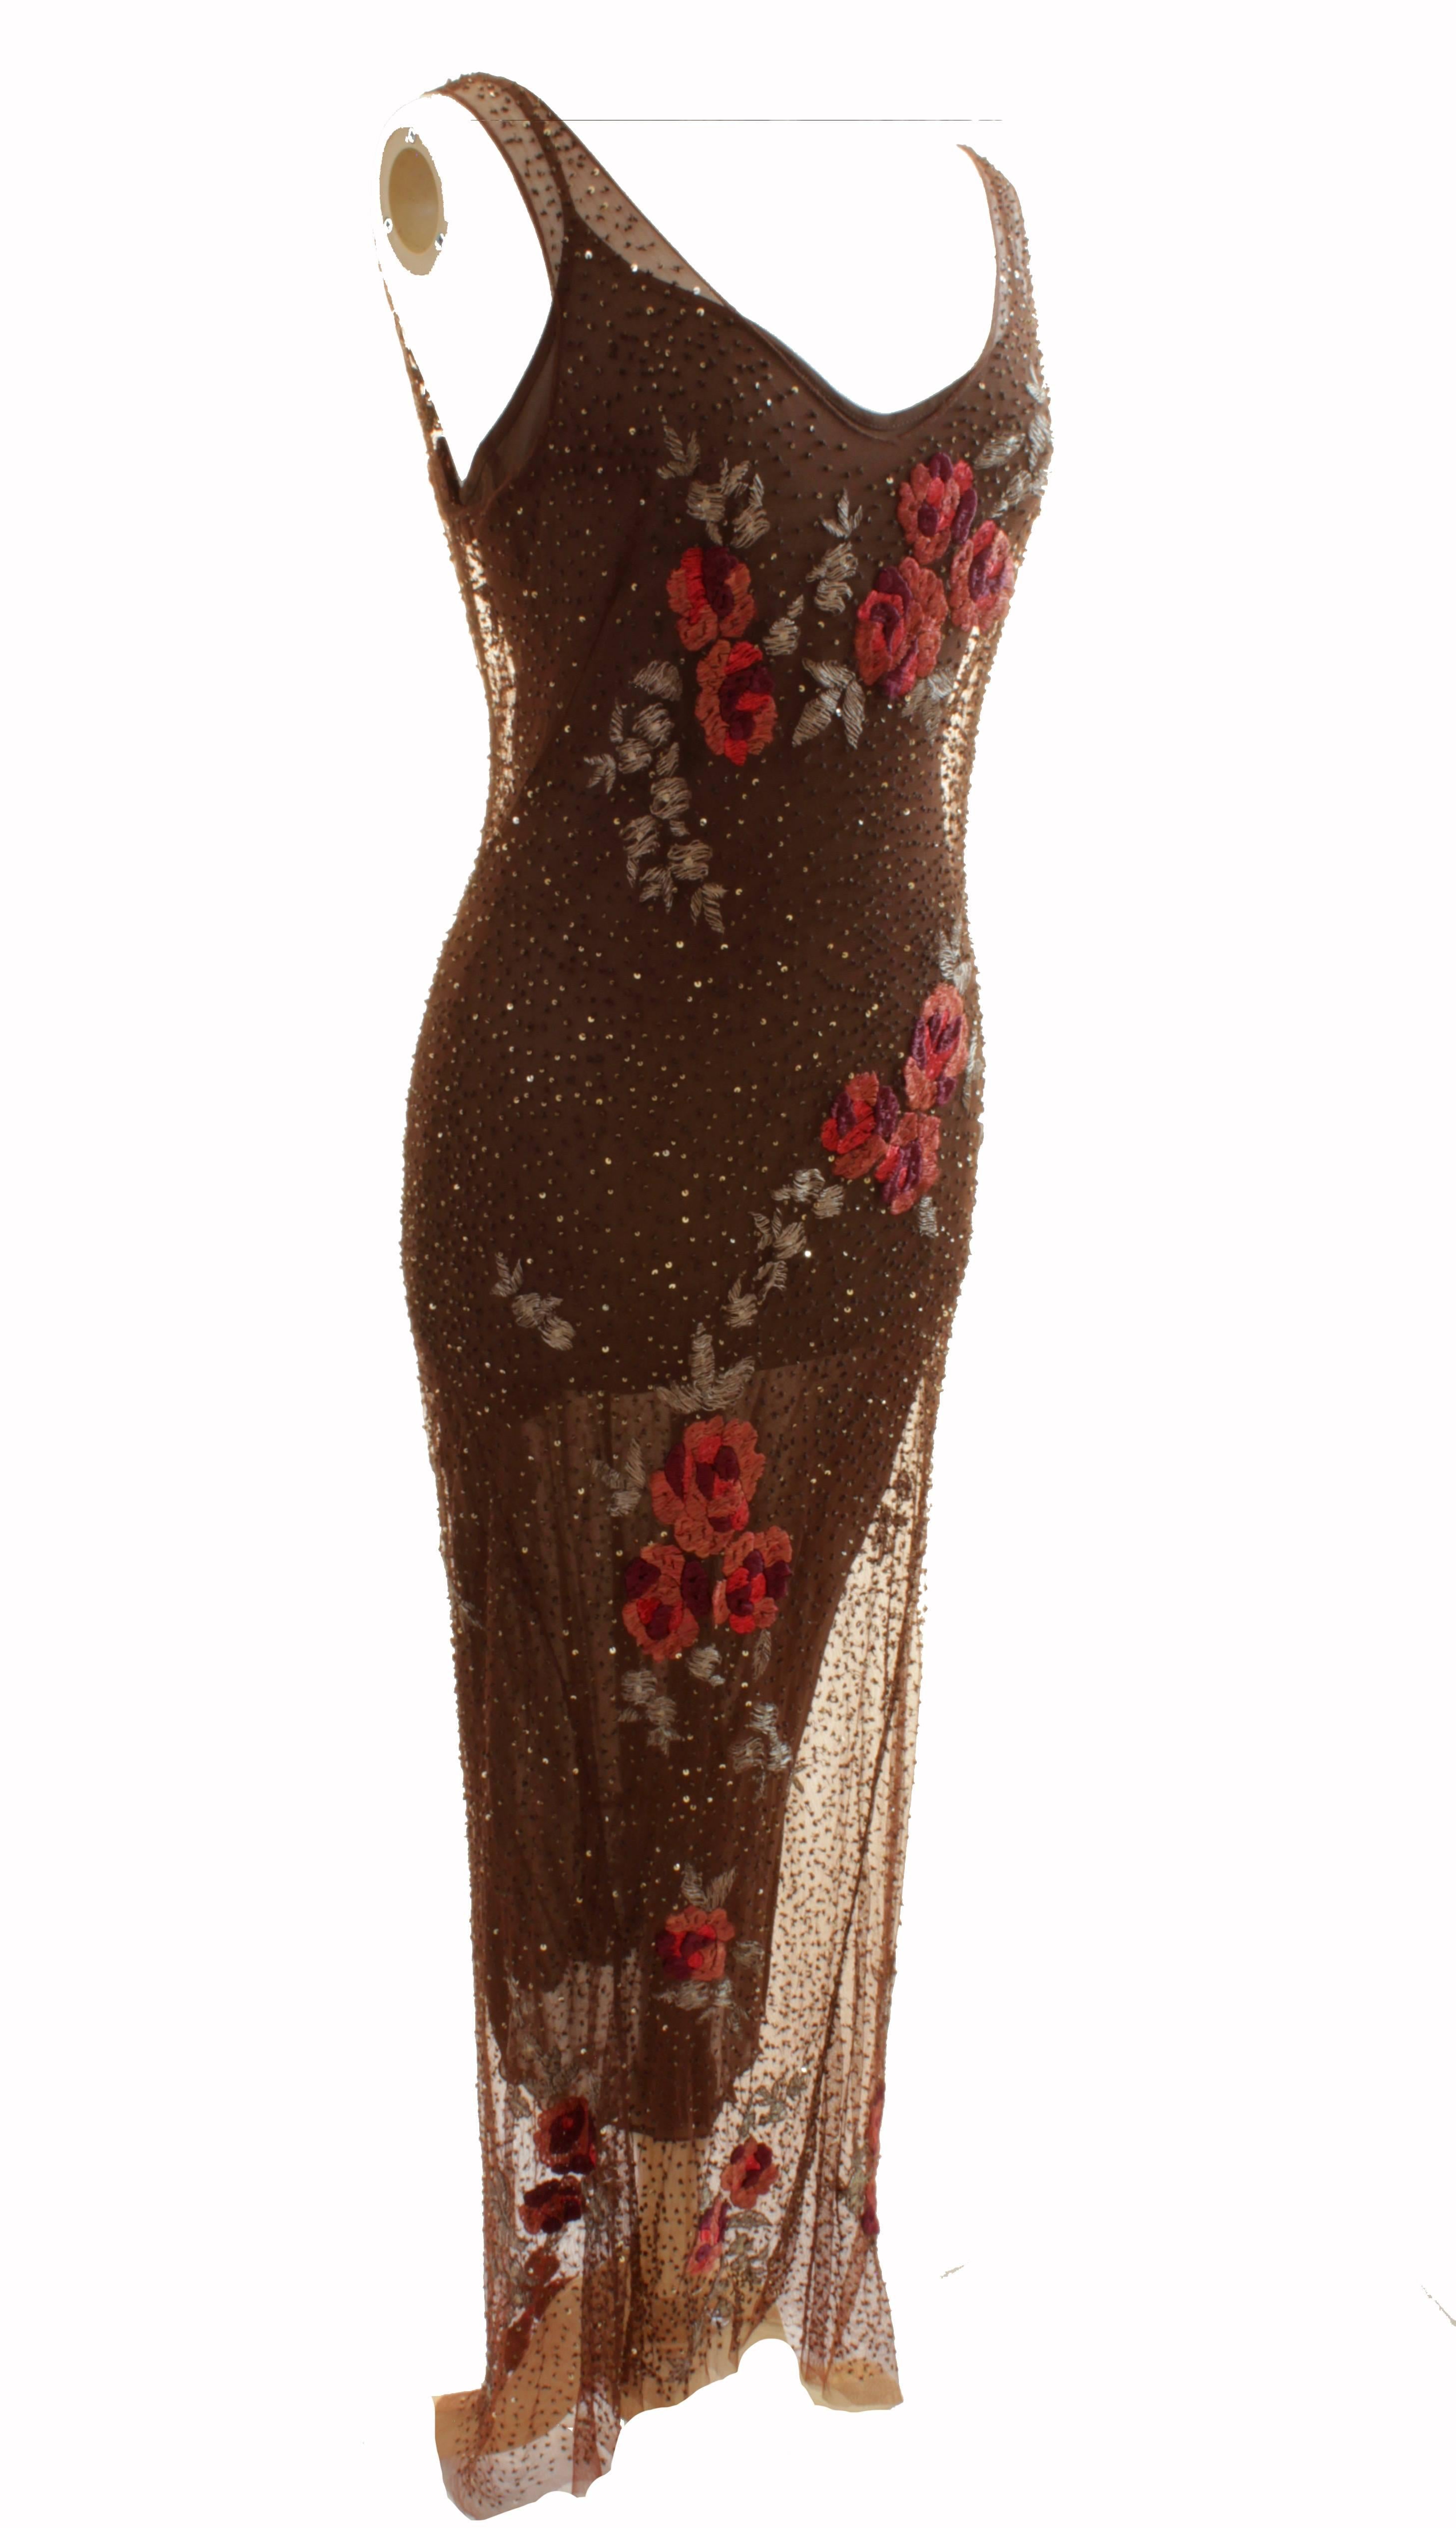 This brown slip dress with floral embroidery overlay was made in Italy but sadly the designer label tag is missing.  We were told the dress was made by Dolce & Gabbana, but without a tag, we cannot say with certainly.  Regardless, this set is two